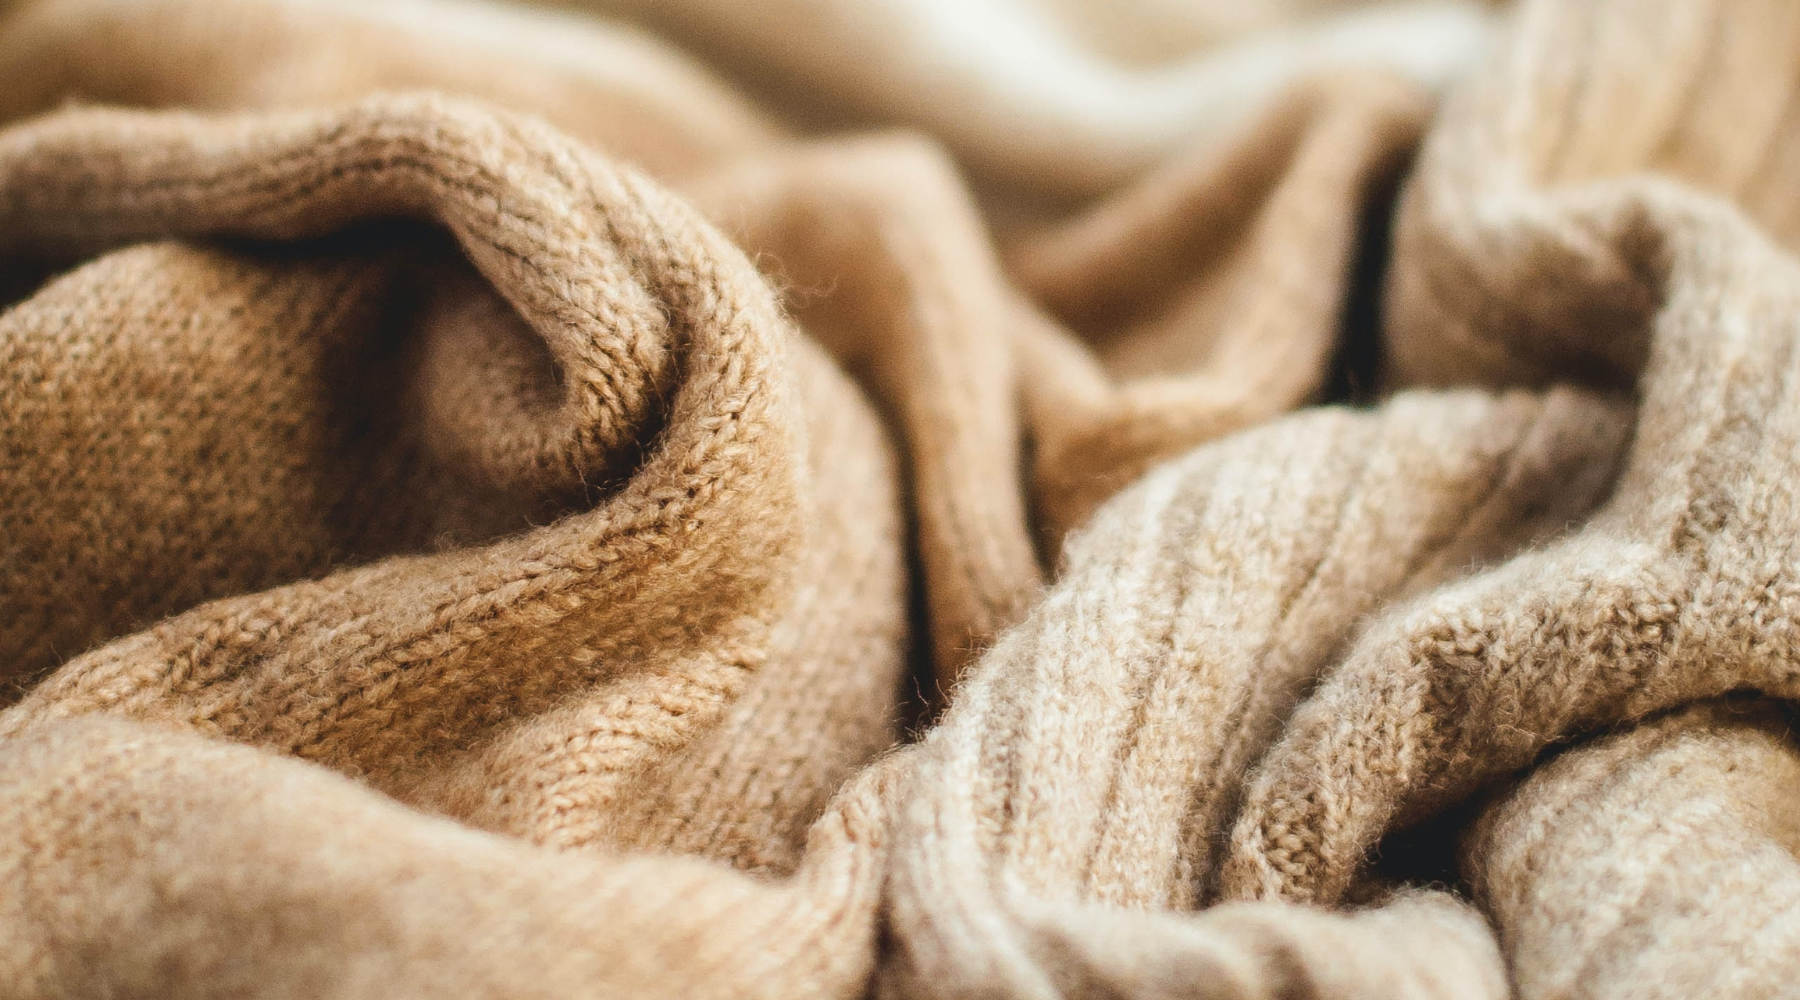 Care tips for knitwear and wool clothing